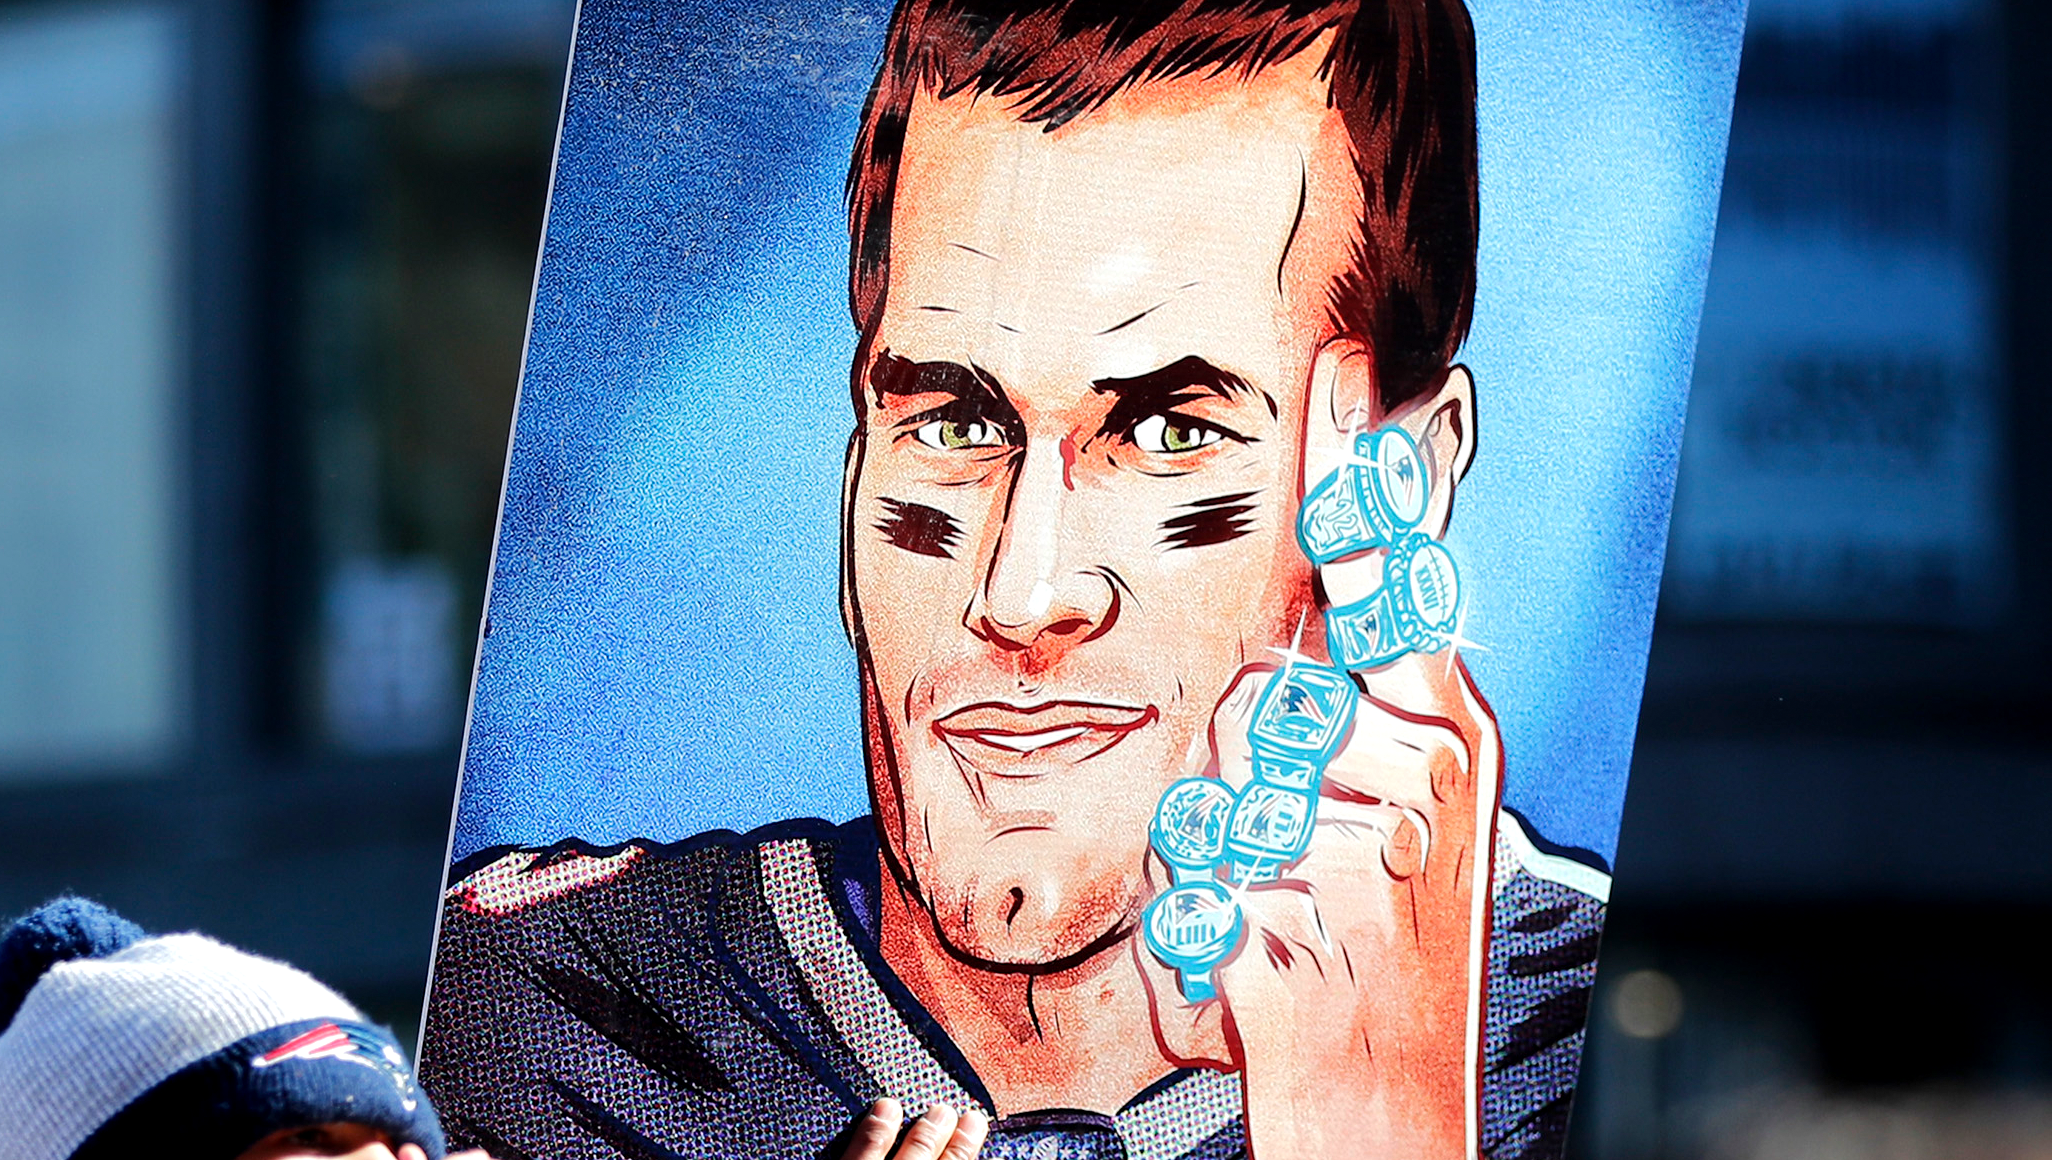 New Jersey man Scott Spina busted for selling fake Tom Brady Super Bowl  rings